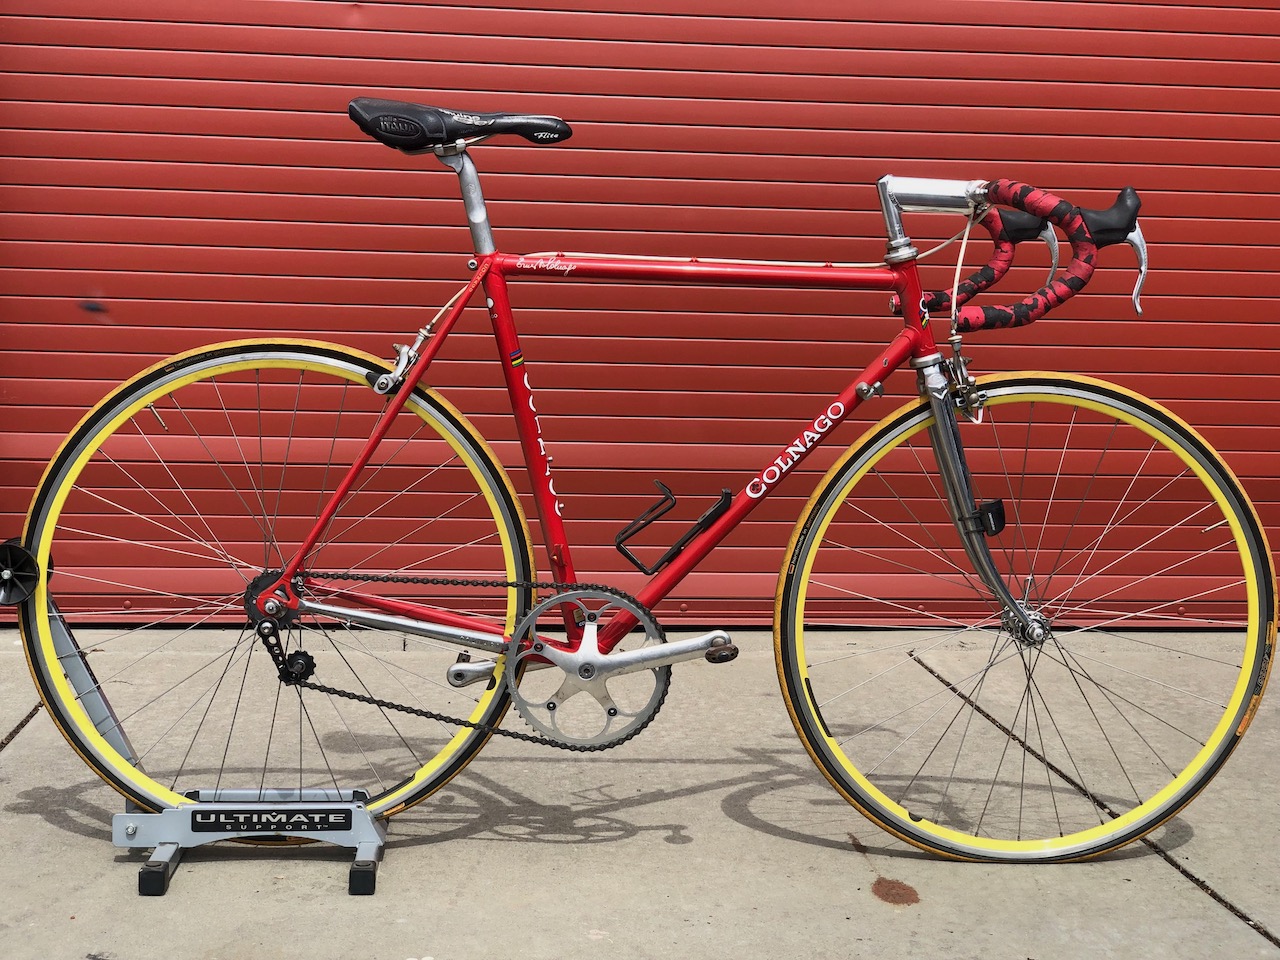 A classic, red steel frame "Mexico" Colnago, currently set up as a single speed.